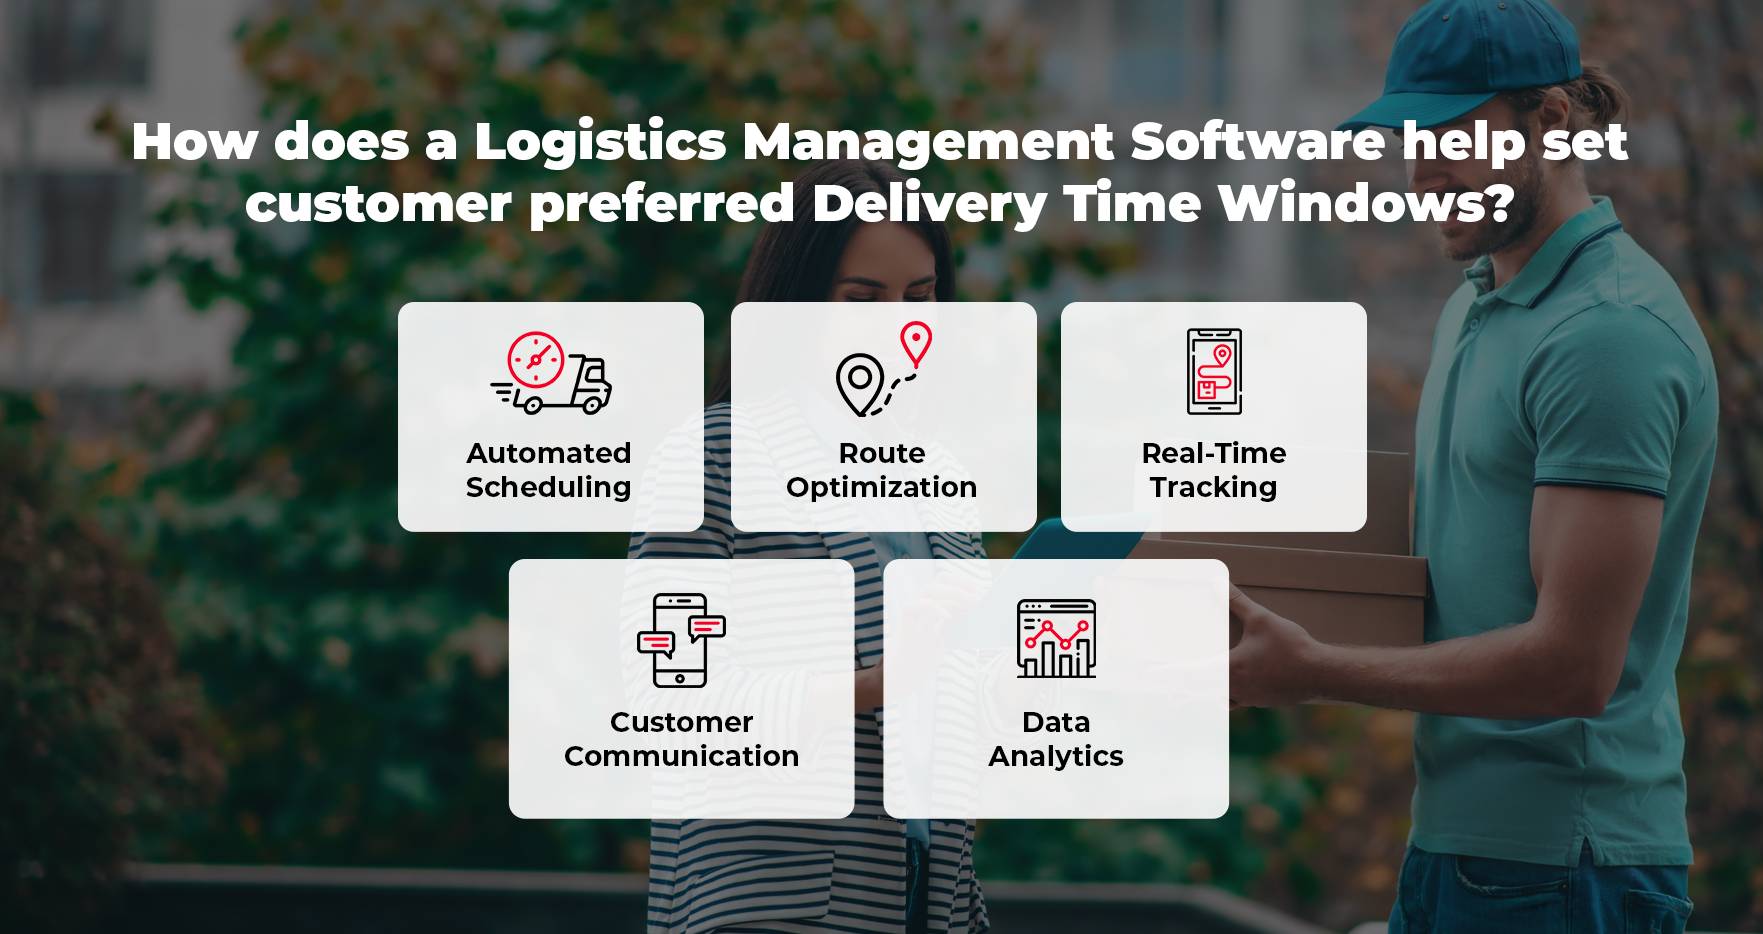 How does Logistics management software help schedule delivery time windows